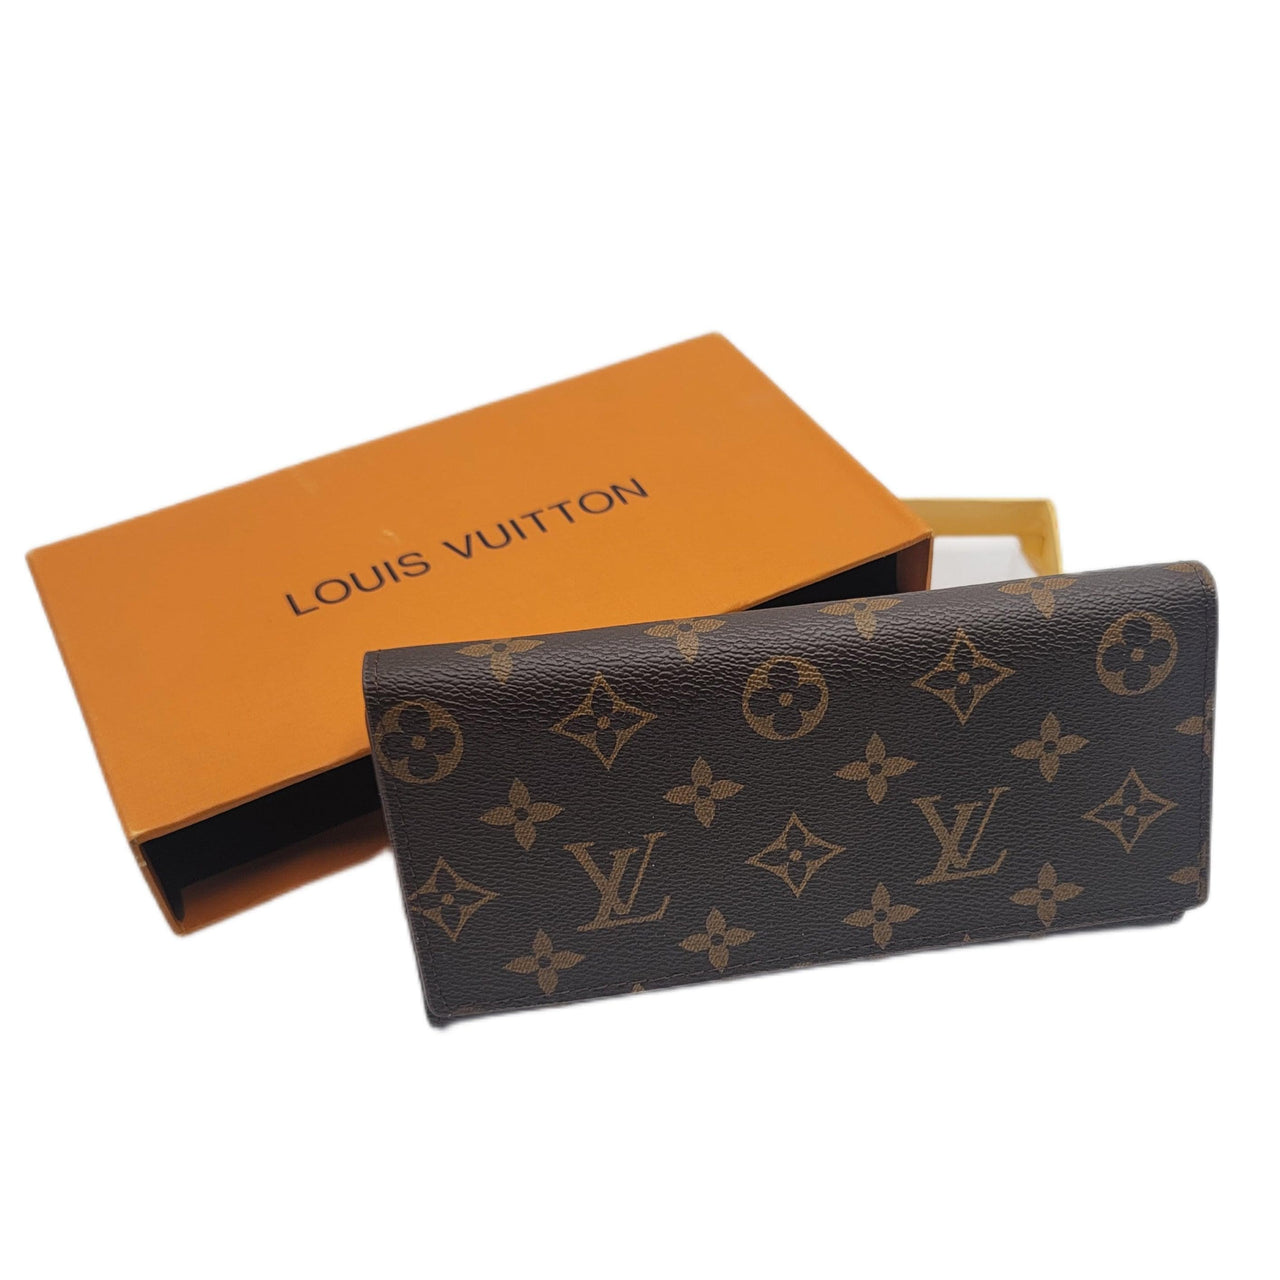 The Bag Couture Luggage & Bags Louis Vuitton 3 Fold Wallet Classic Brown